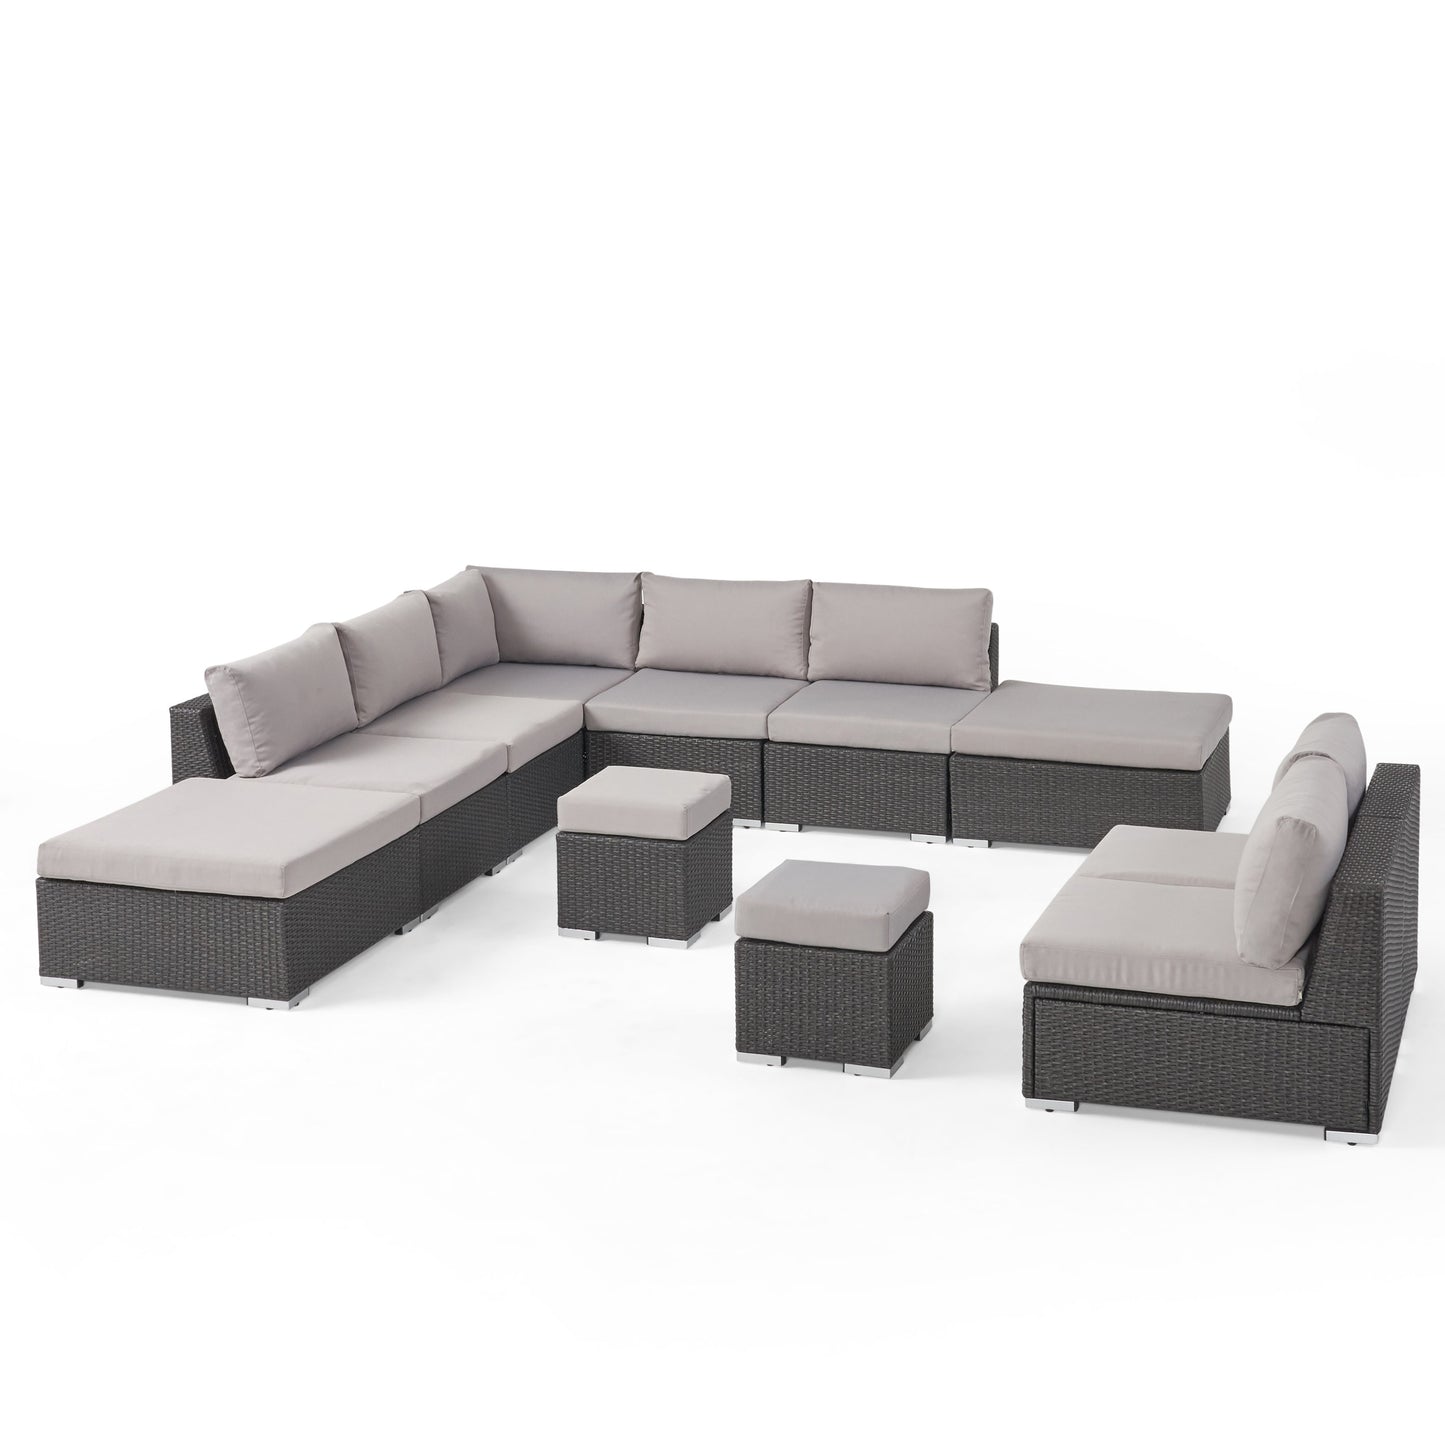 Tammy Rosa Outdoor 7 Seat Wicker Sofa Sectional Set with Aluminum Frame